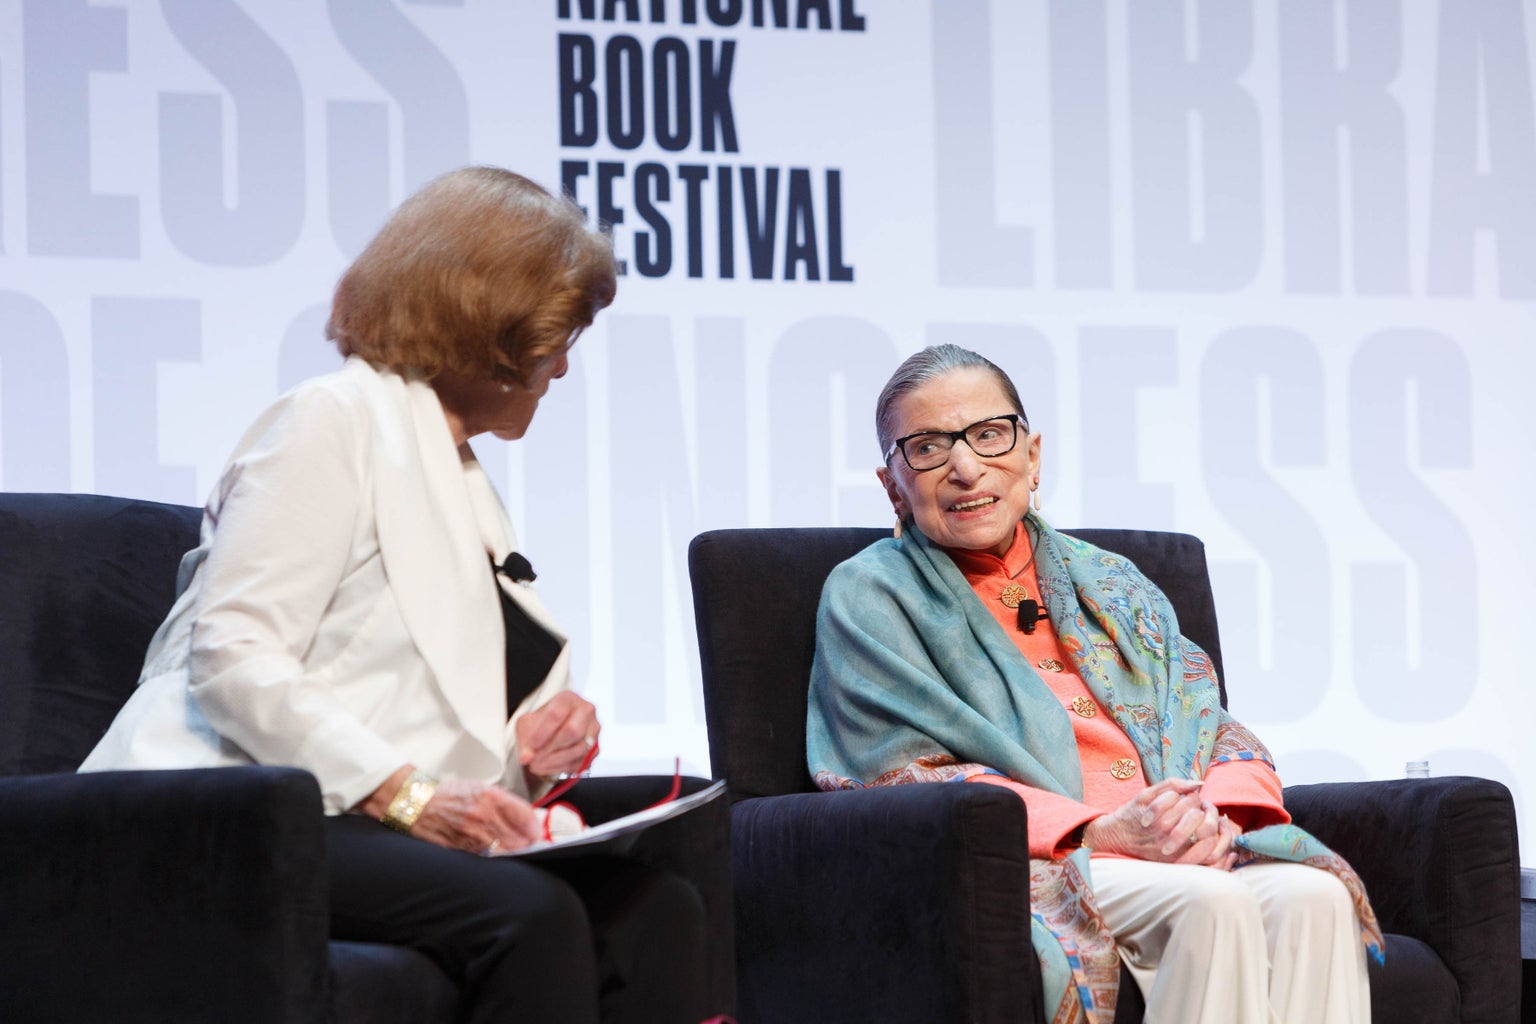 U.S. Supreme Court Justice Ruth Bader Ginsburg speaks on the Main Stage of the National Book Festival